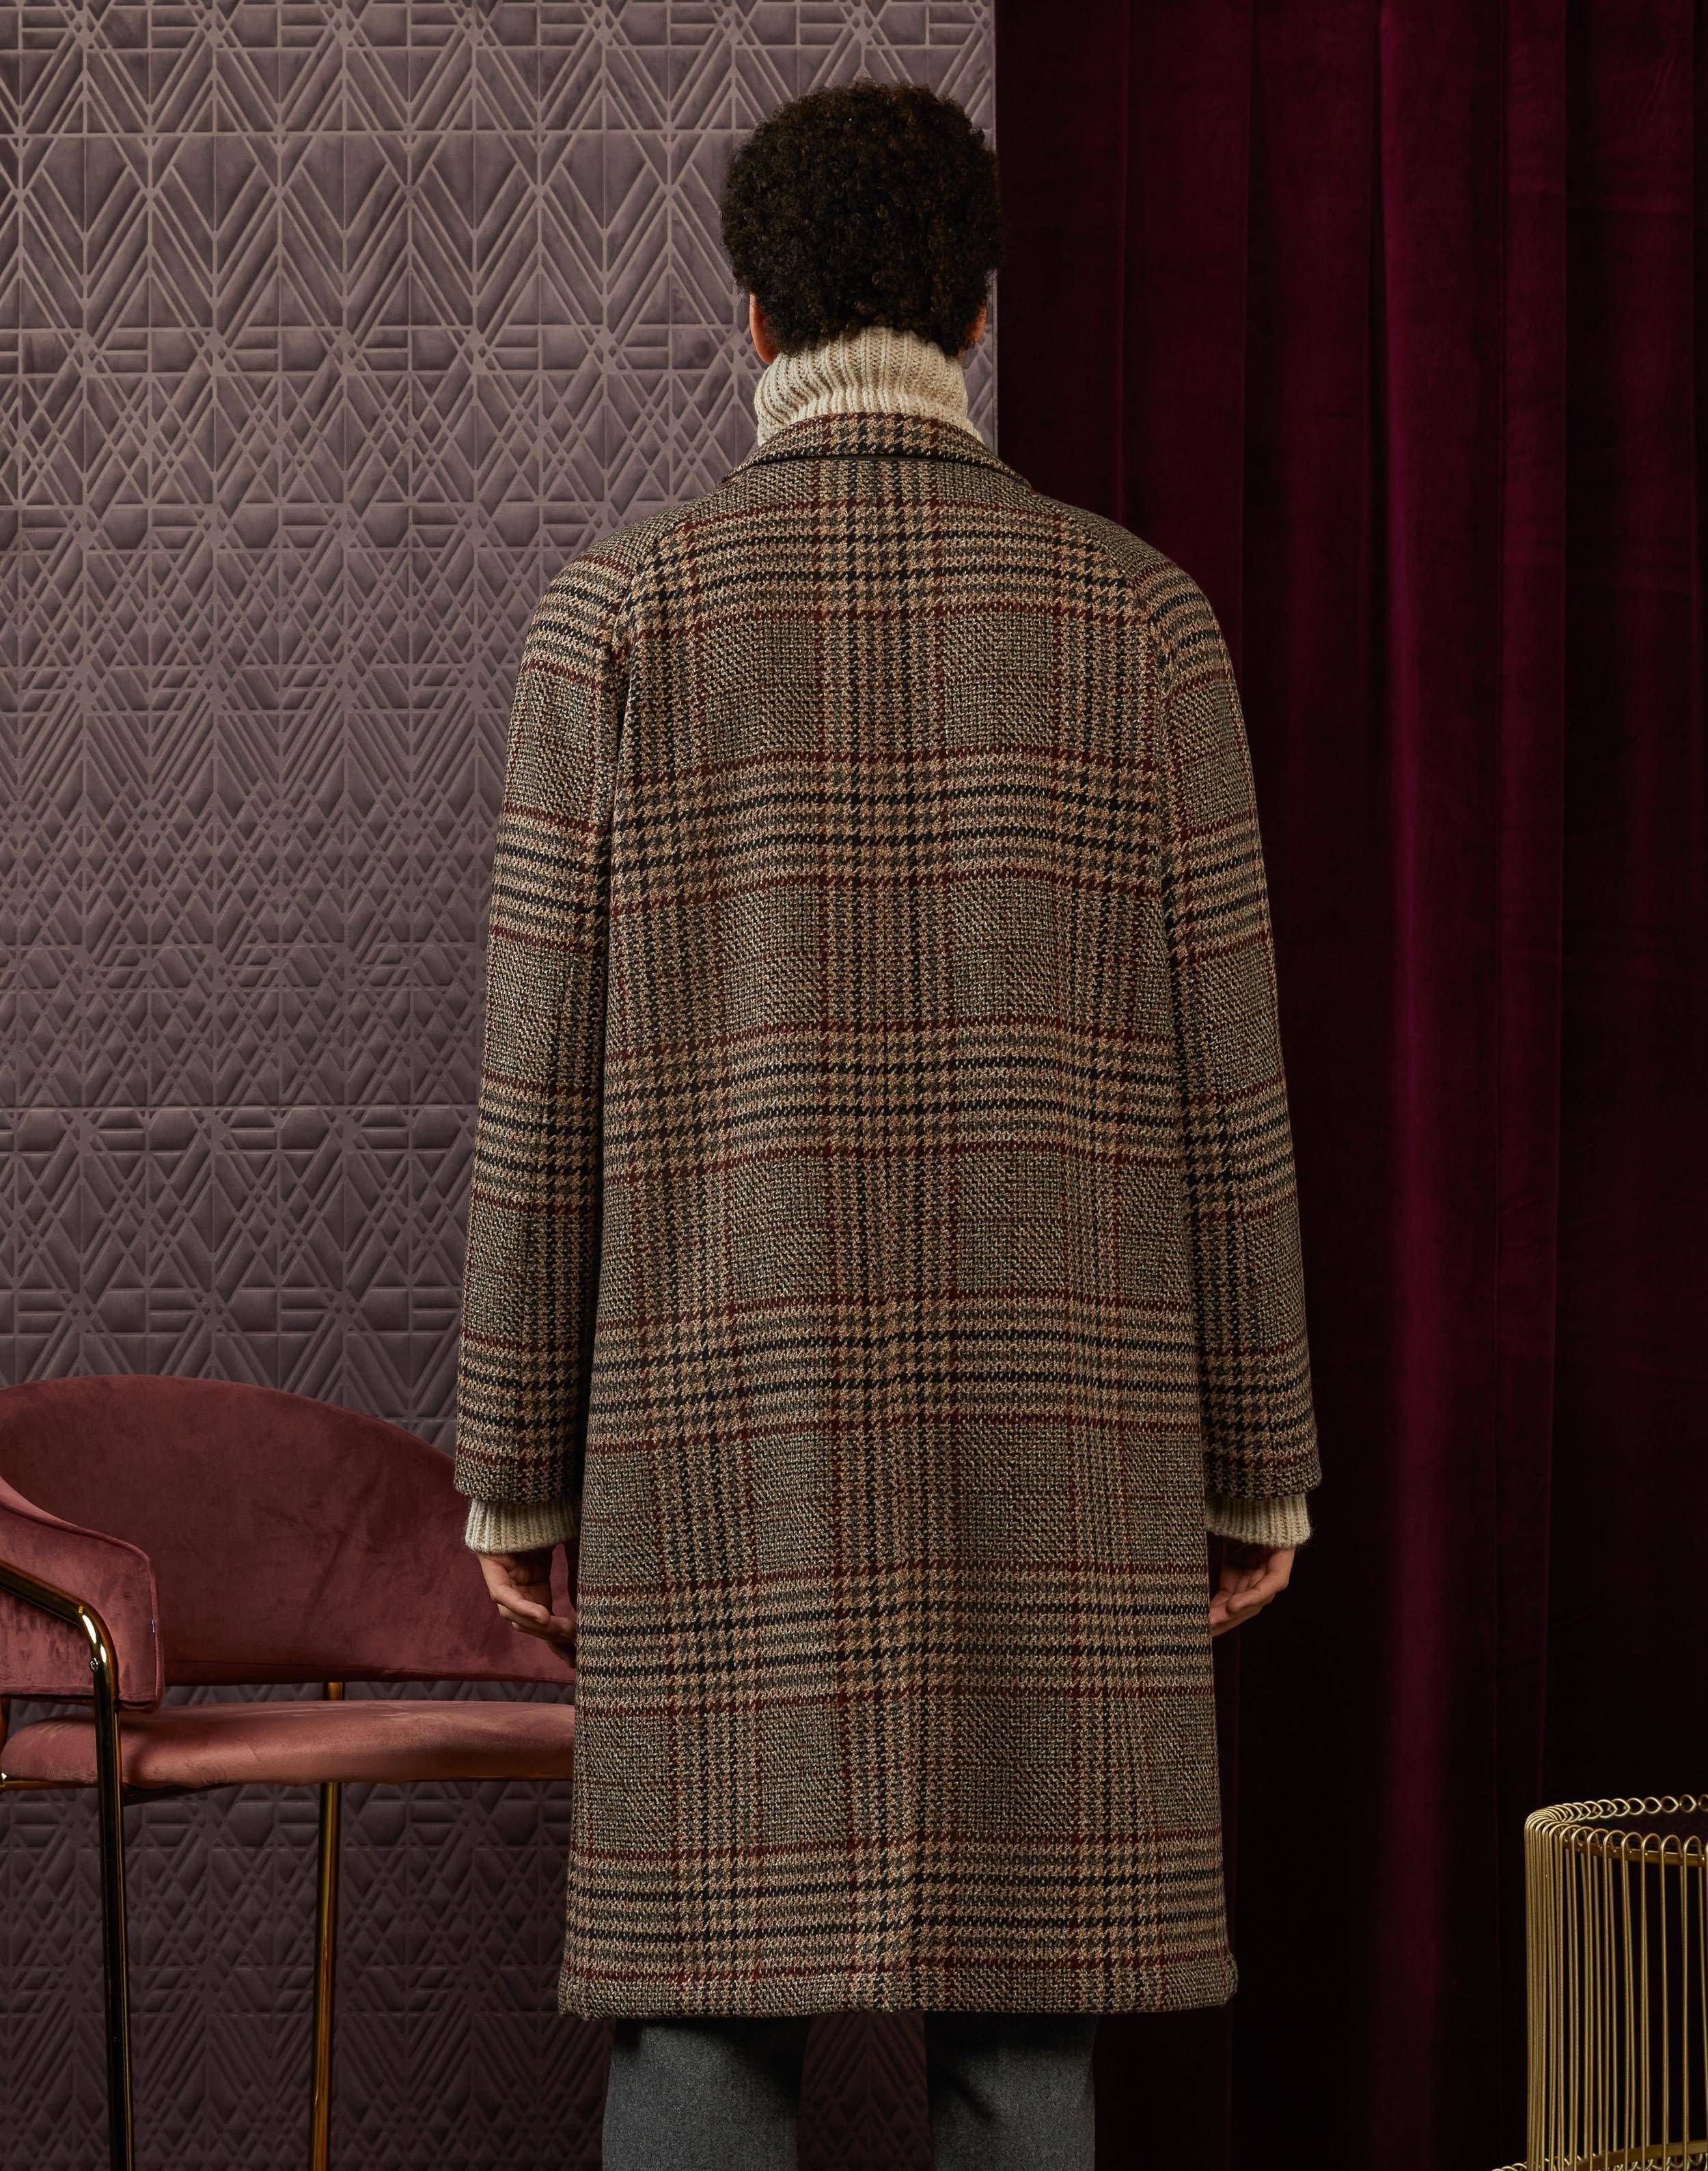 Single-breasted wool-and-cashmere coat in beige, red and black